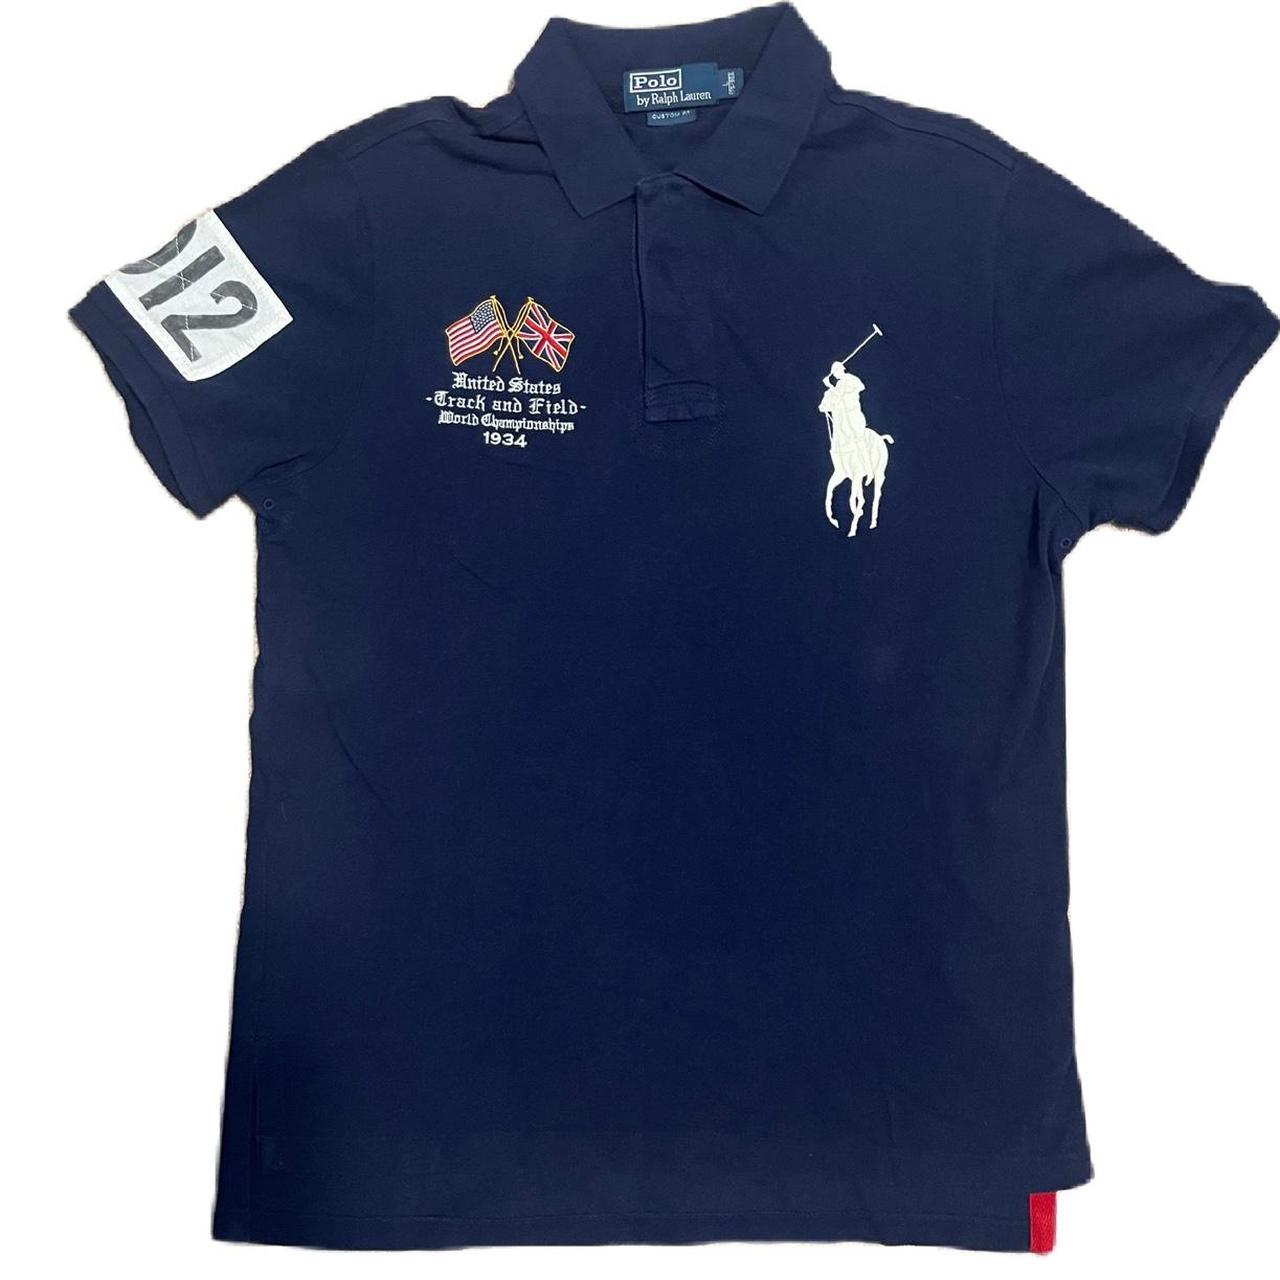 USA TRACK AND FIELD RALPH LAUREN POLO CHIEF KEEF... - Depop